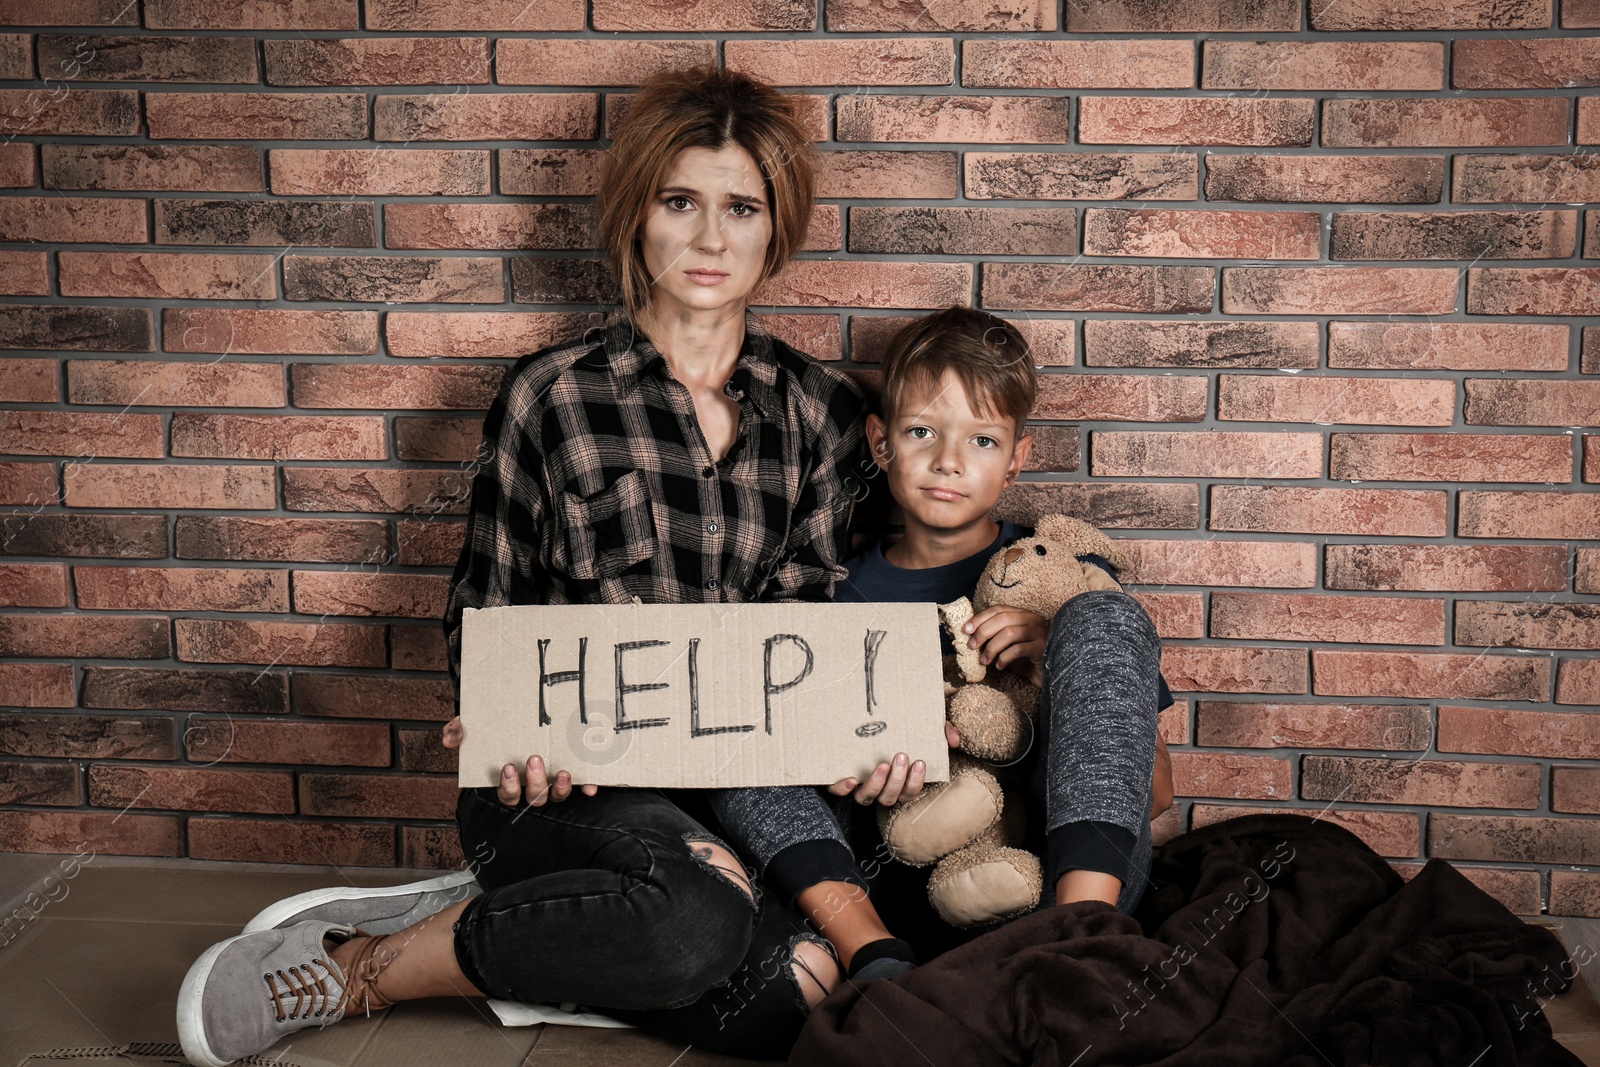 Photo of Poor woman with her son asking for help near brick wall